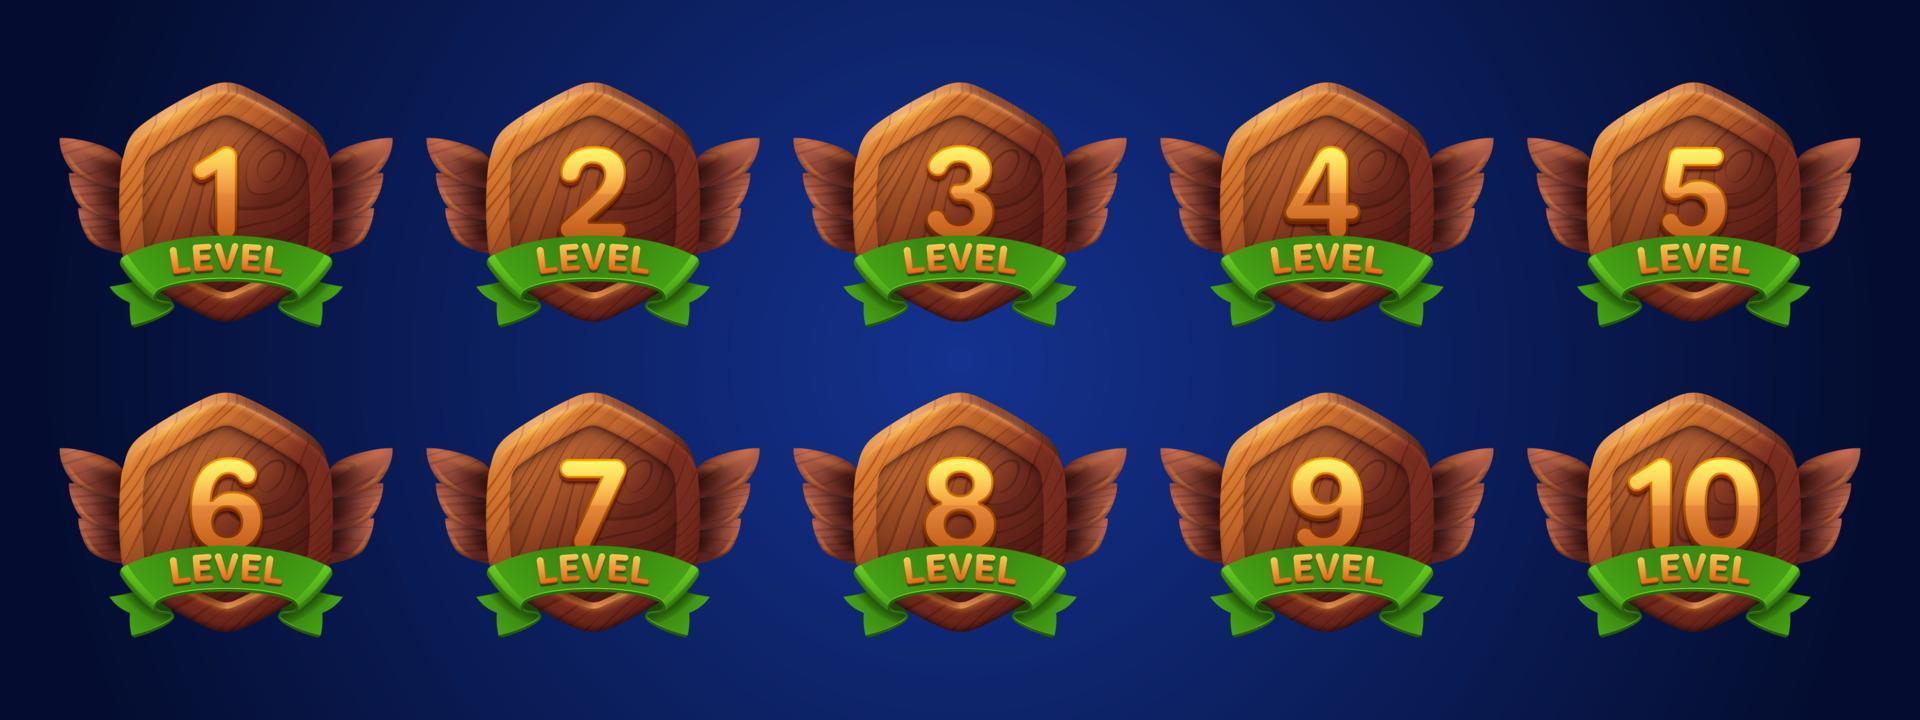 Game wooden badges with level number vector